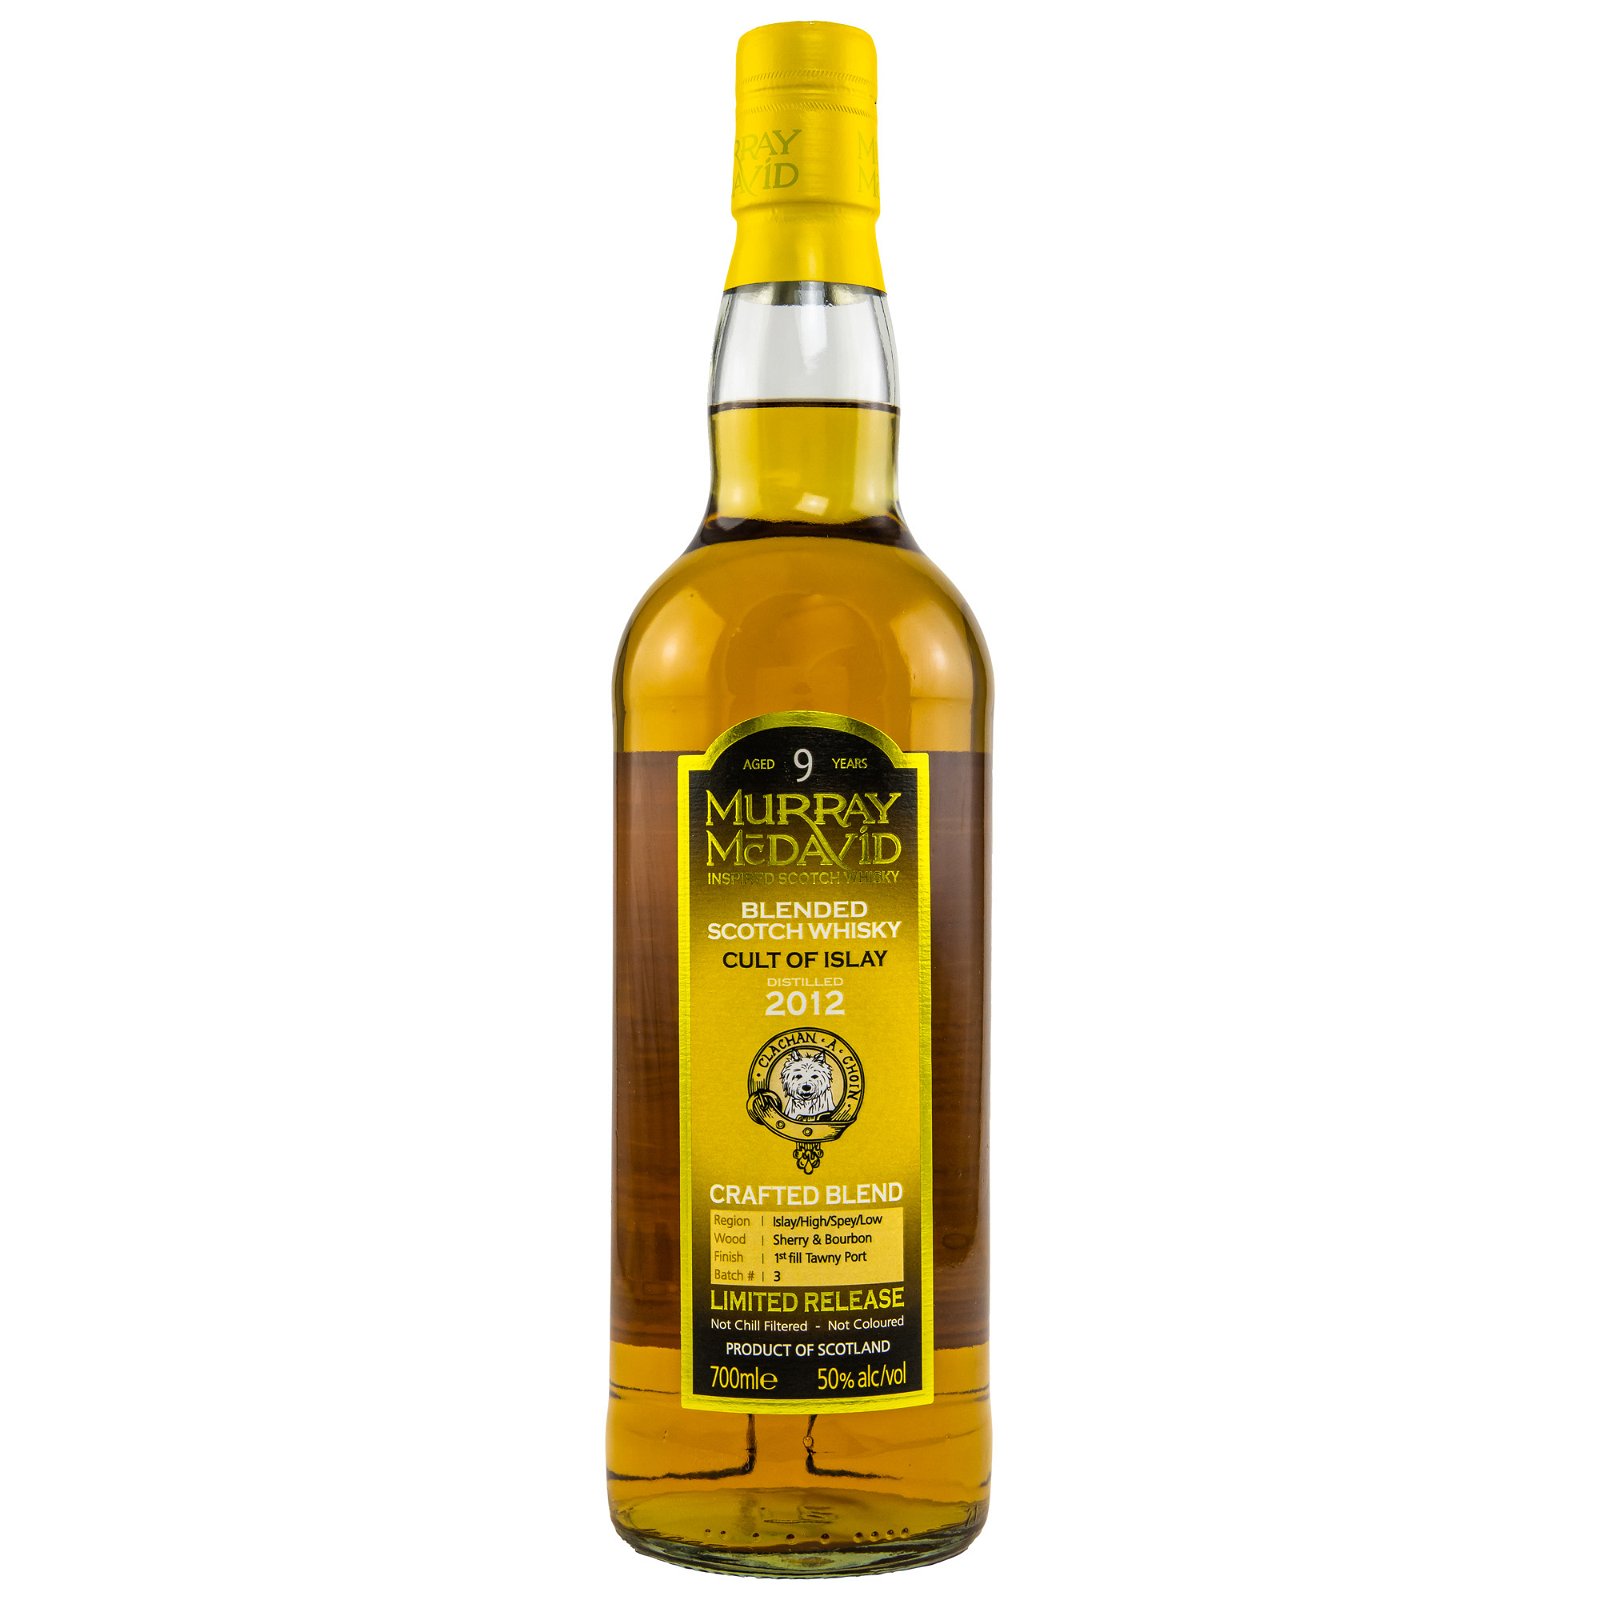 Cult of Islay 2012 - 9 Jahre 1st fill Tawny Port Cask Finish Batch No. 3 Crafted Blend (Murray McDavid)